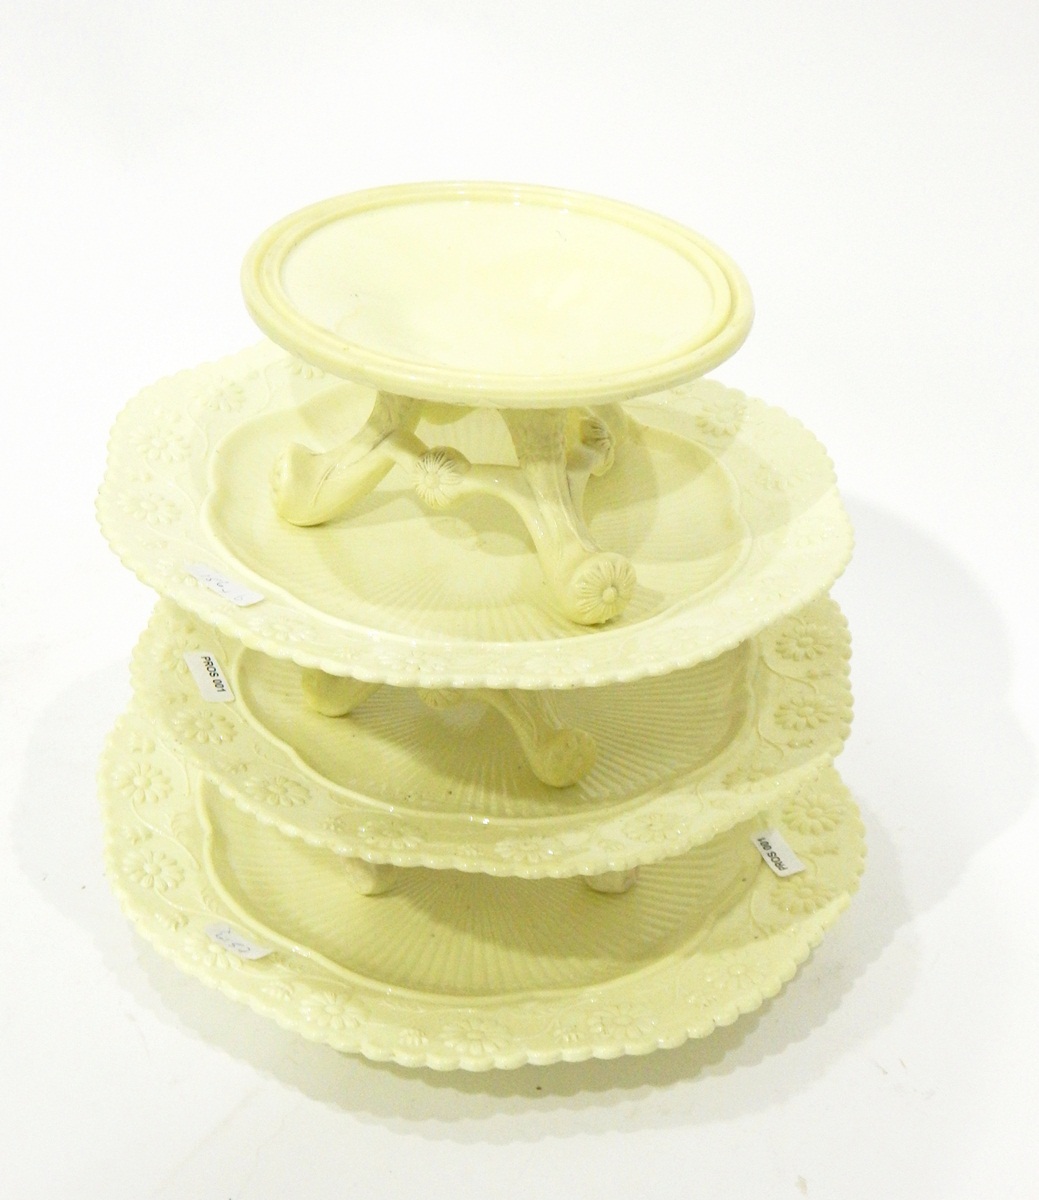 Sowerby opaque cream pressed glass part dessert set comprising three plates with moulded daisy